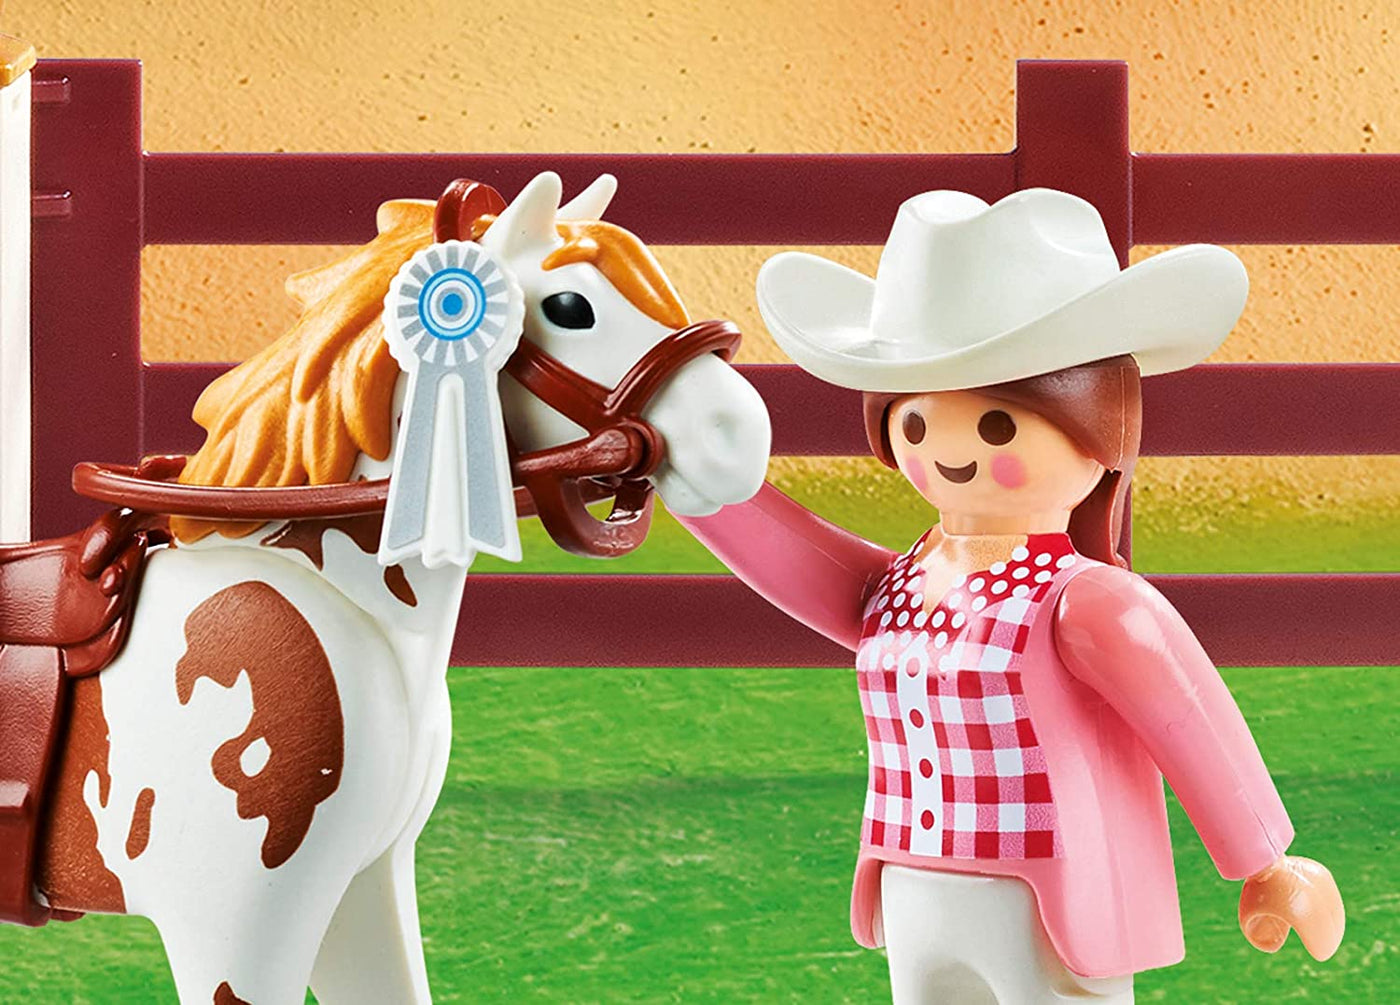 Country - Riding Stable 71238 – Toys and Tales